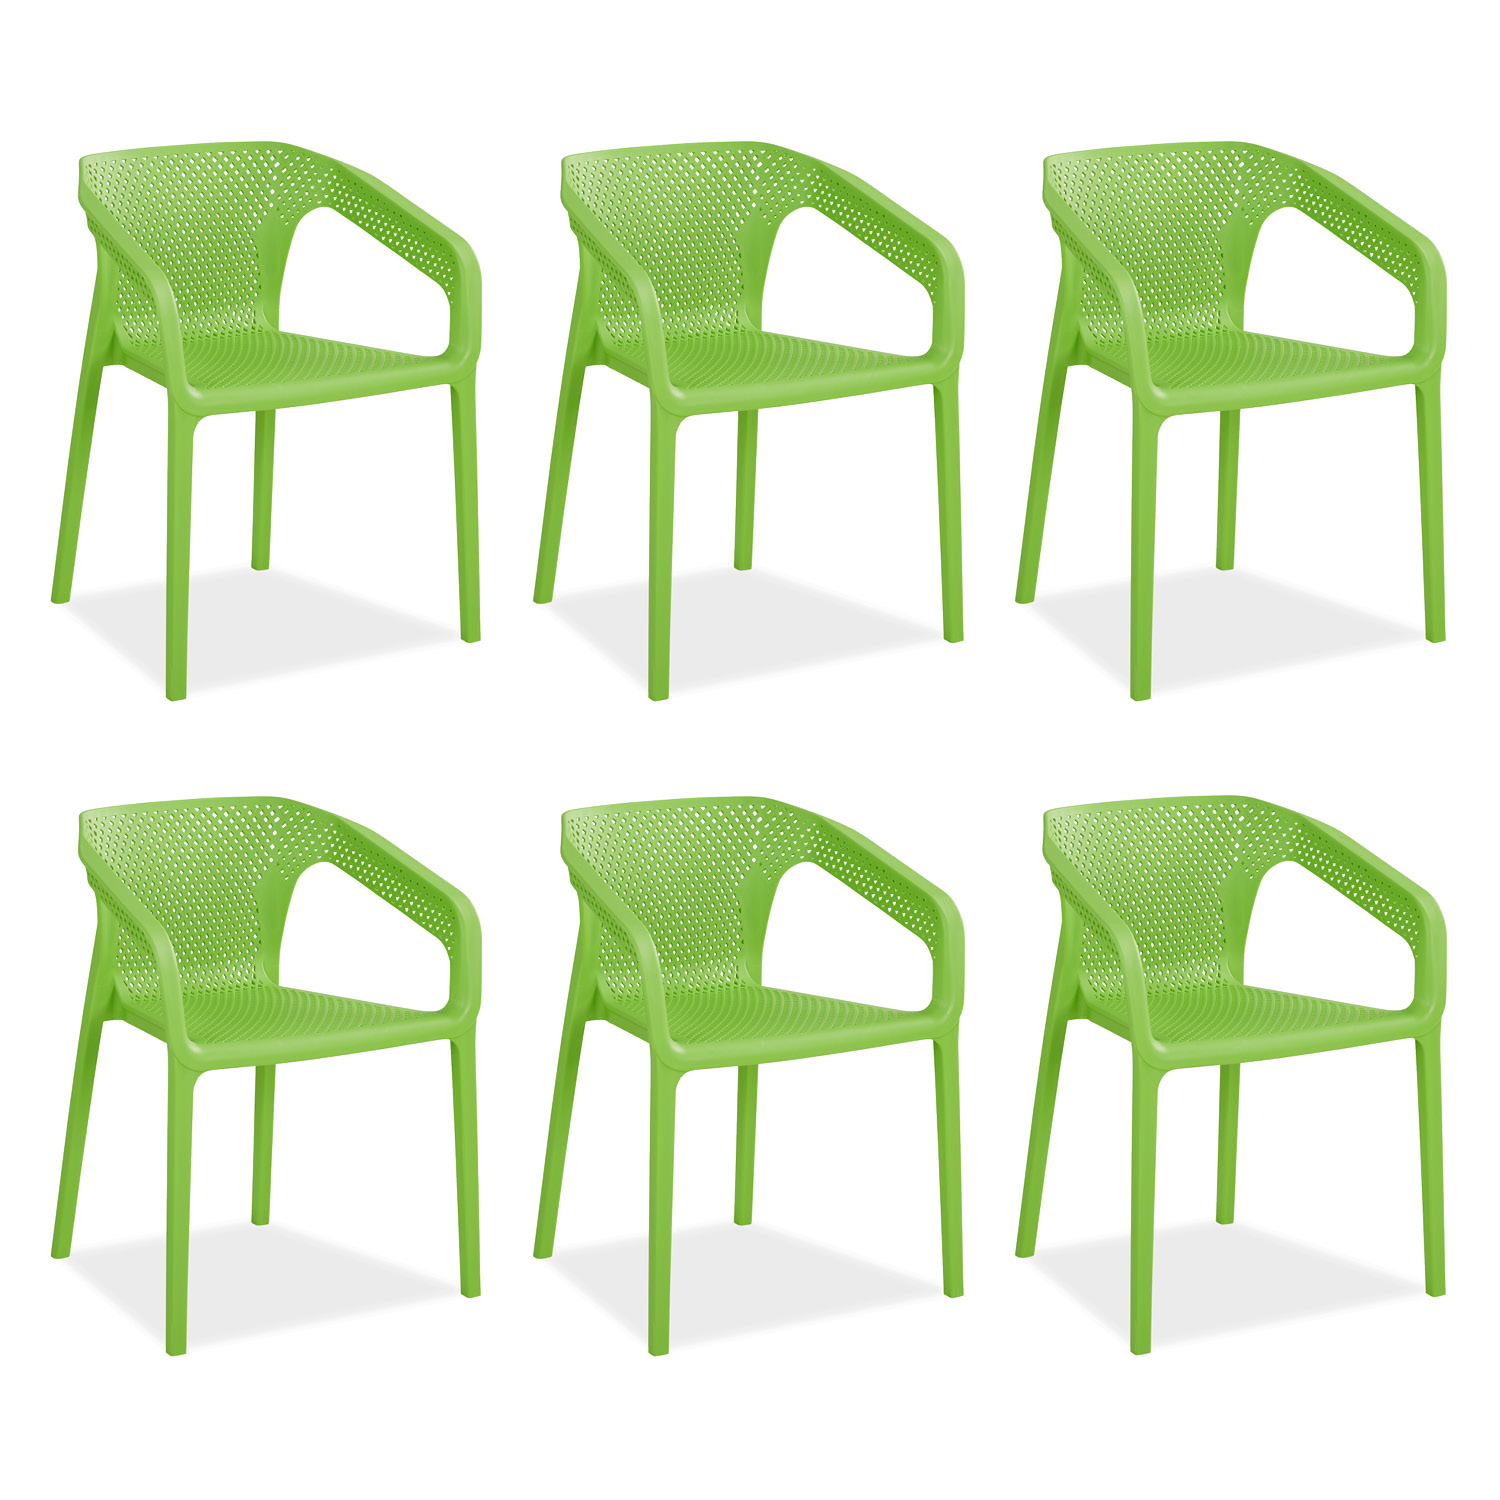 Set of 6 Garden chair with armrests Camping chairs Green Outdoor chairs Plastic Egg chair Lounger chairs Stacking chairs